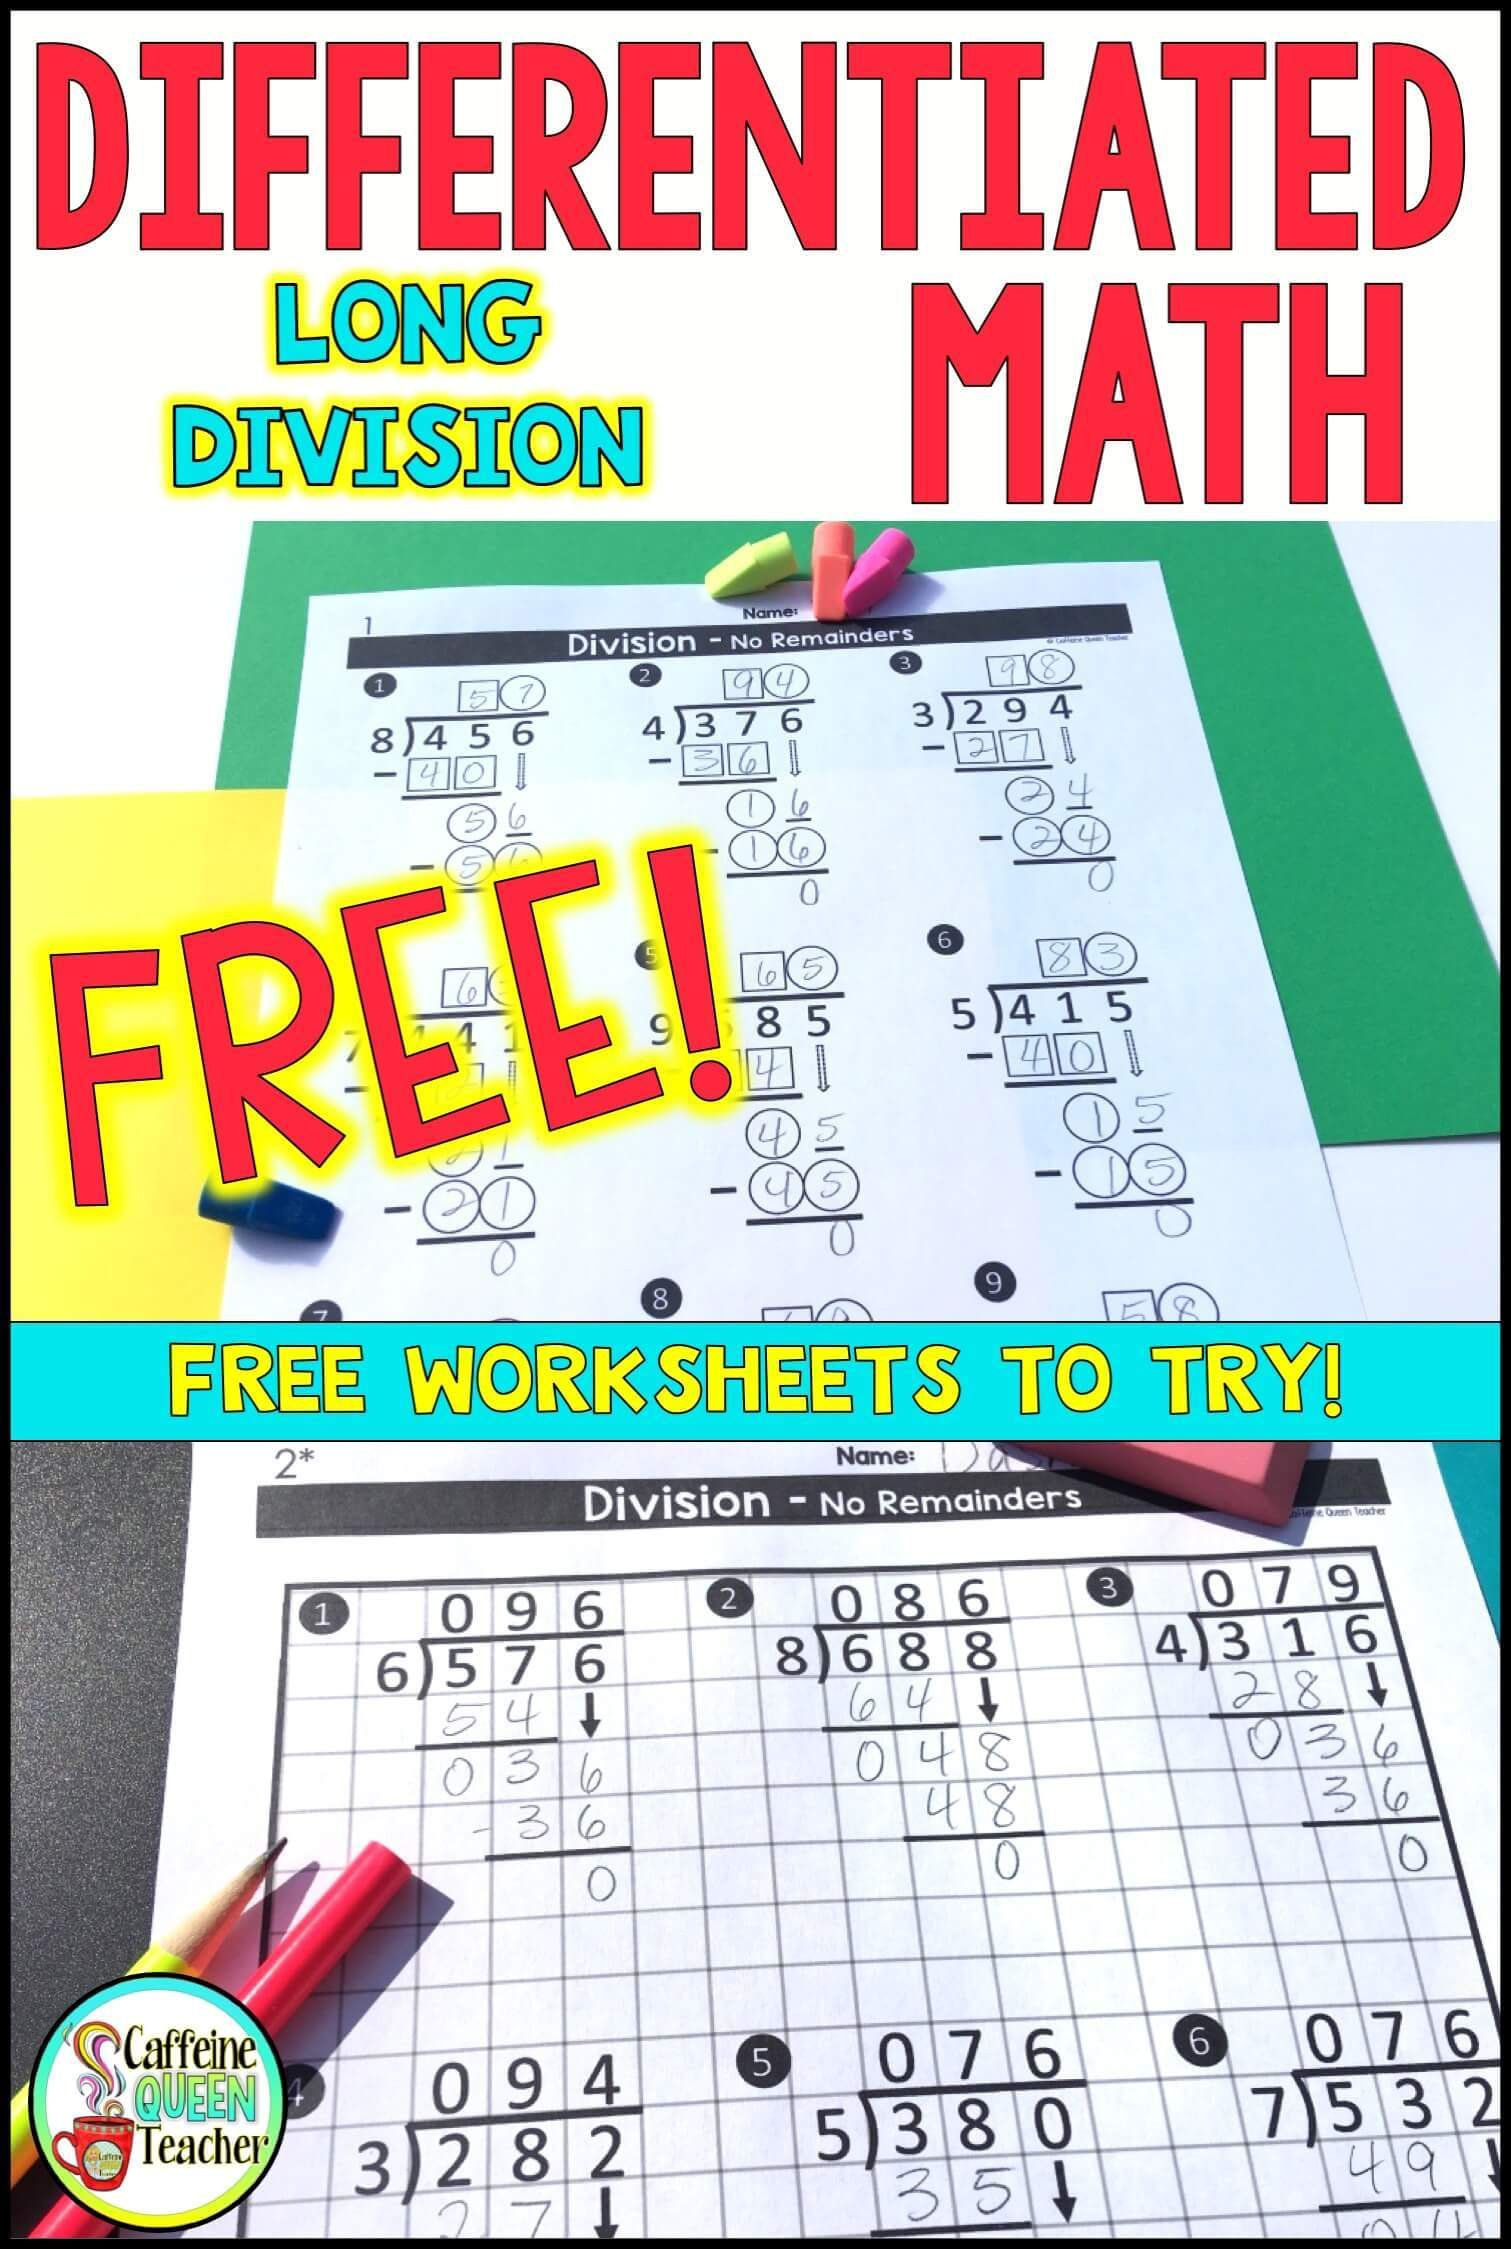 Differentiated Long Division Worksheets For FREE Caffeine Queen 